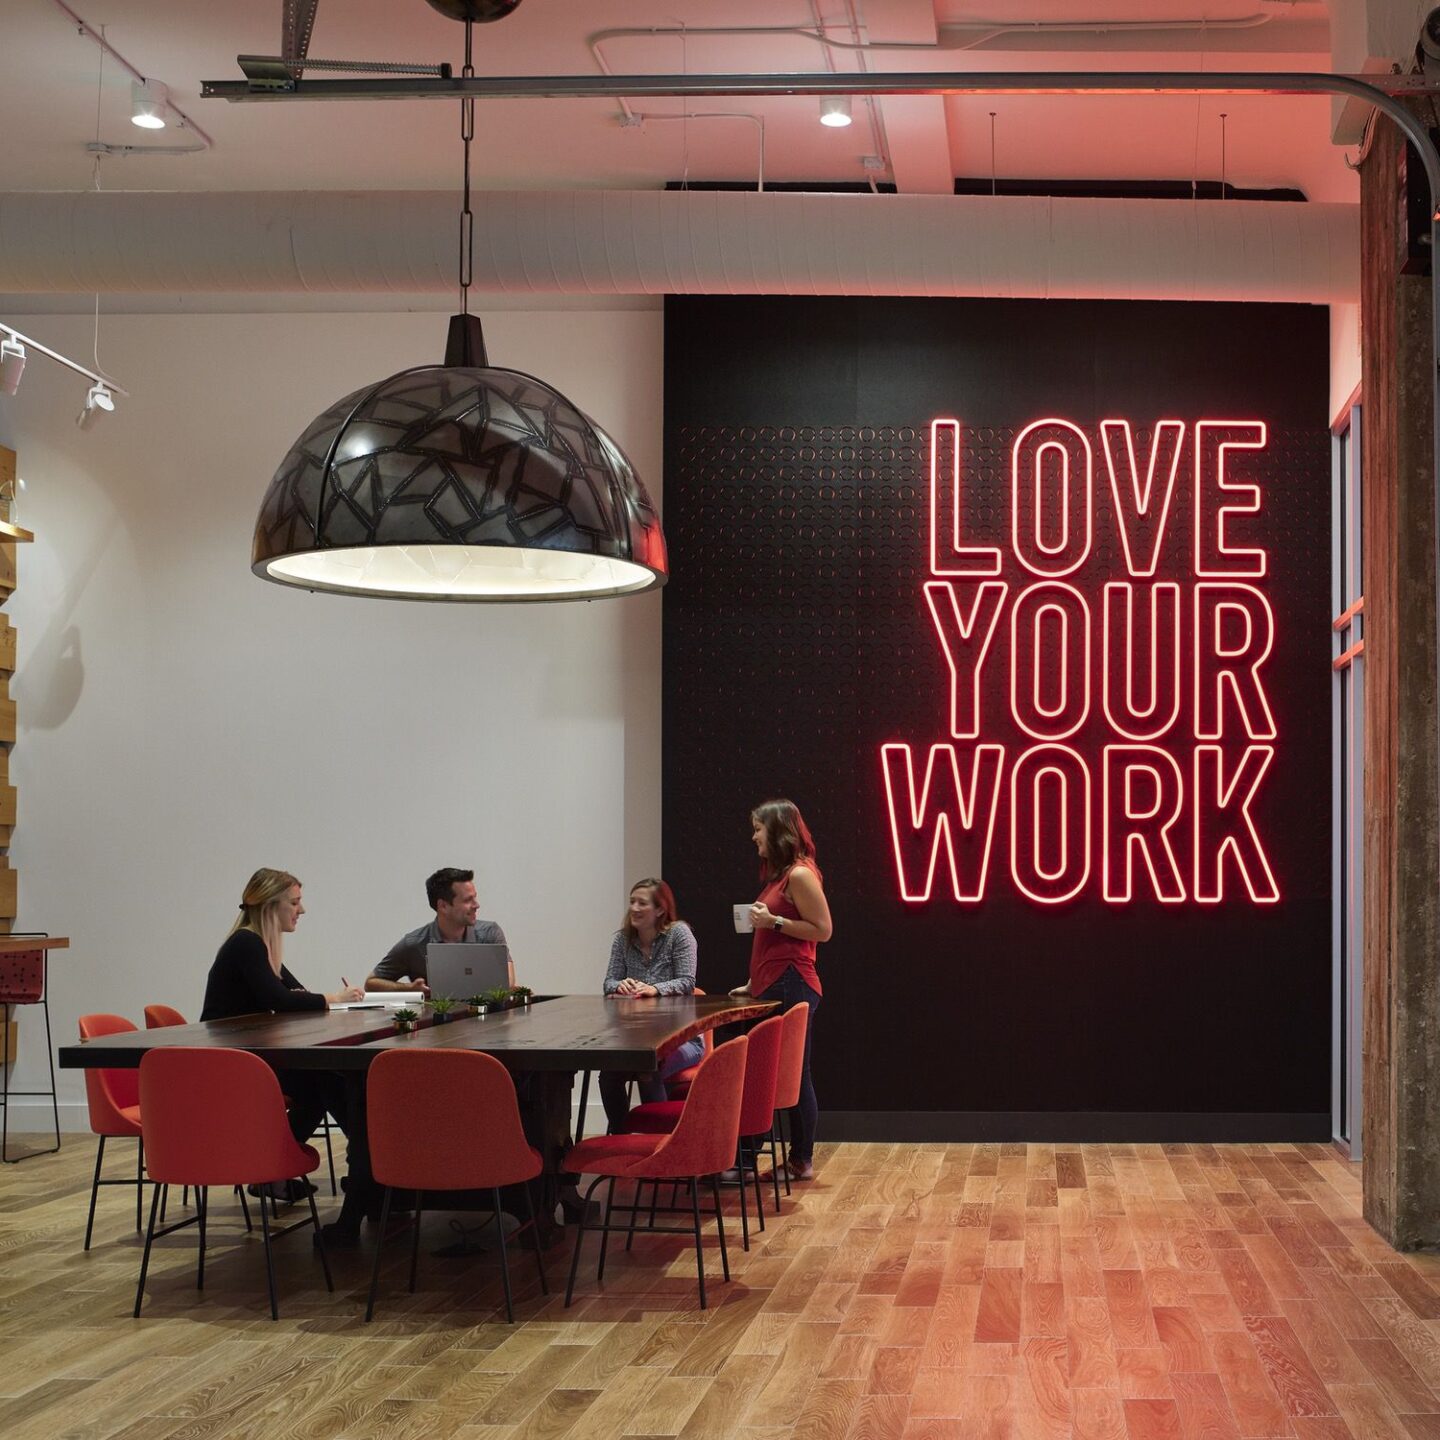 Four people work together at a table infront of a neon sign that reads "love your work"